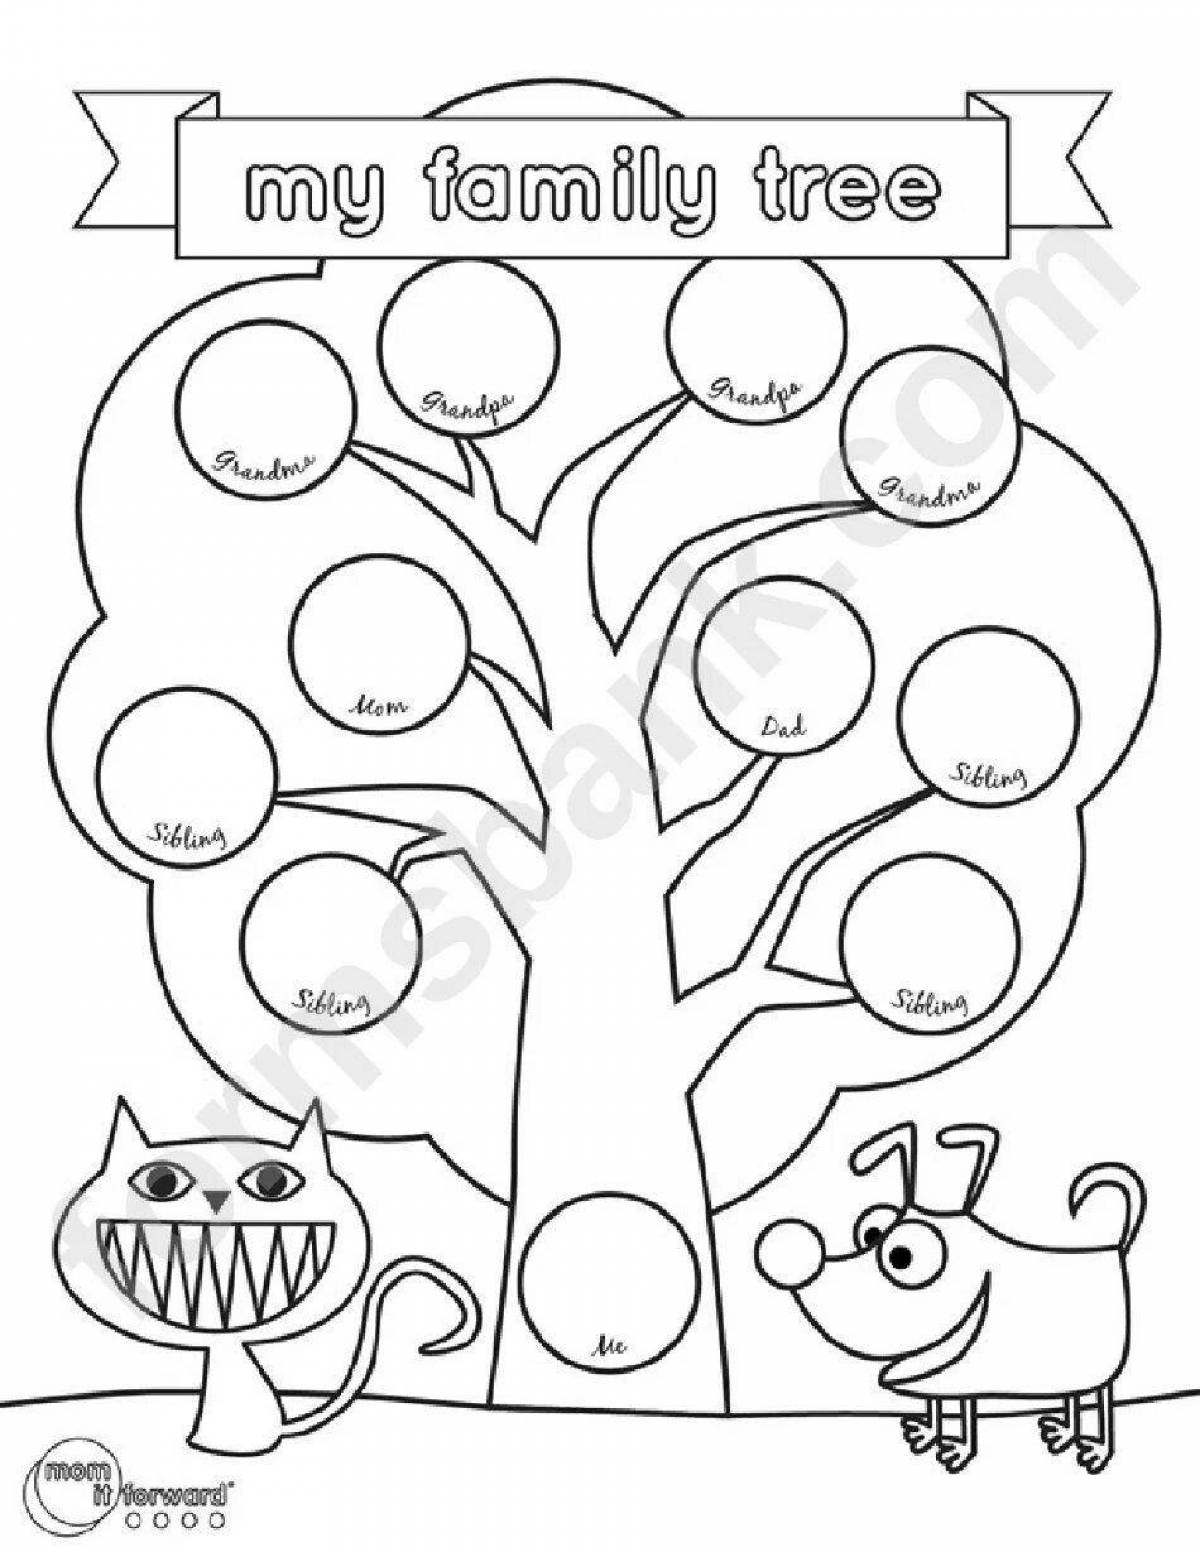 Large family coloring book